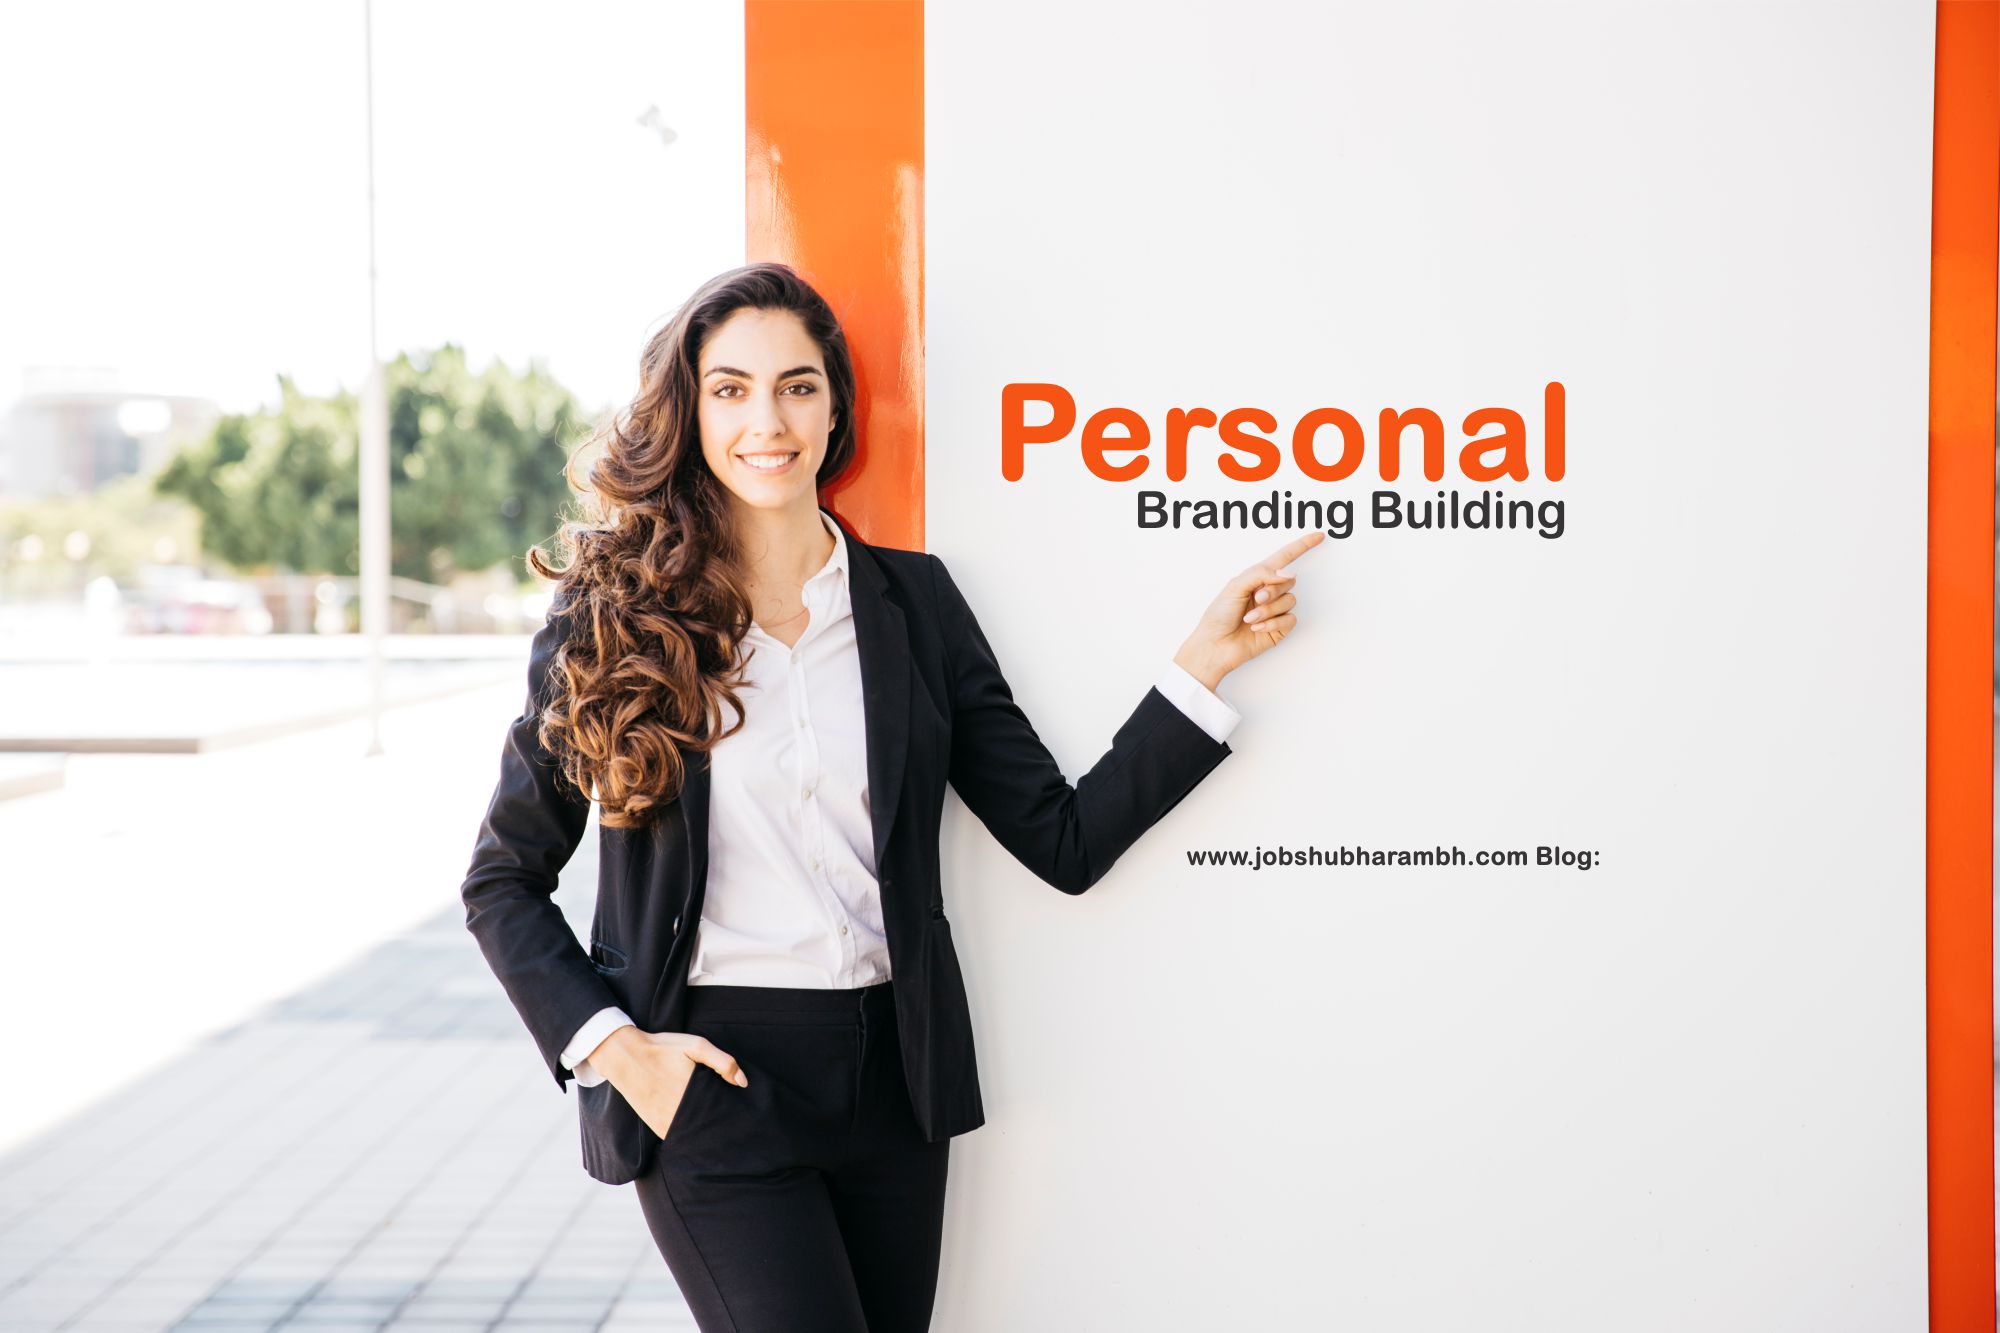 The Art of Personal Branding: Building Your Professional Image